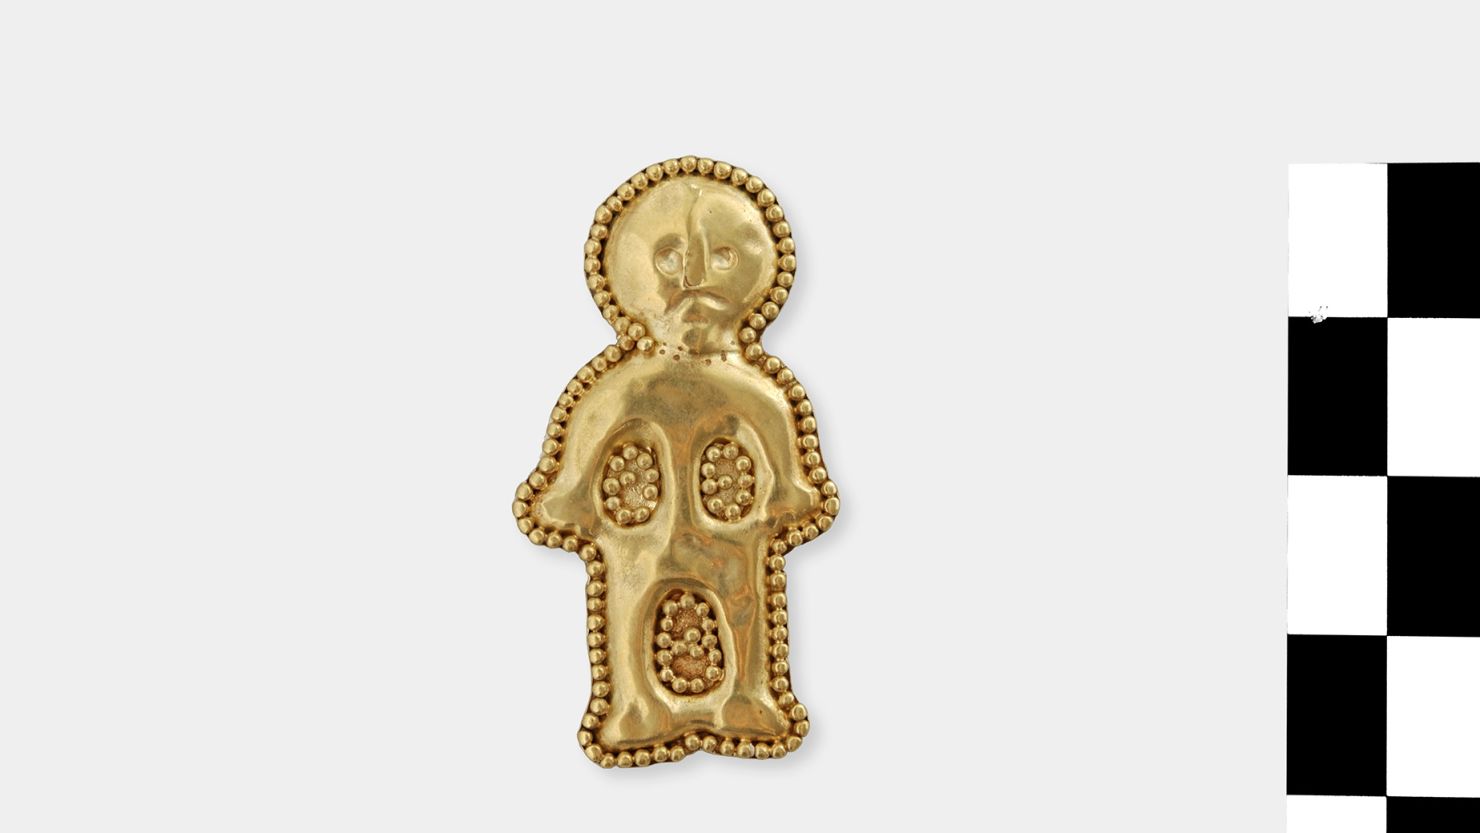 A metal detector helped to find this gold figurine in an Avar cemetery in Hungary.